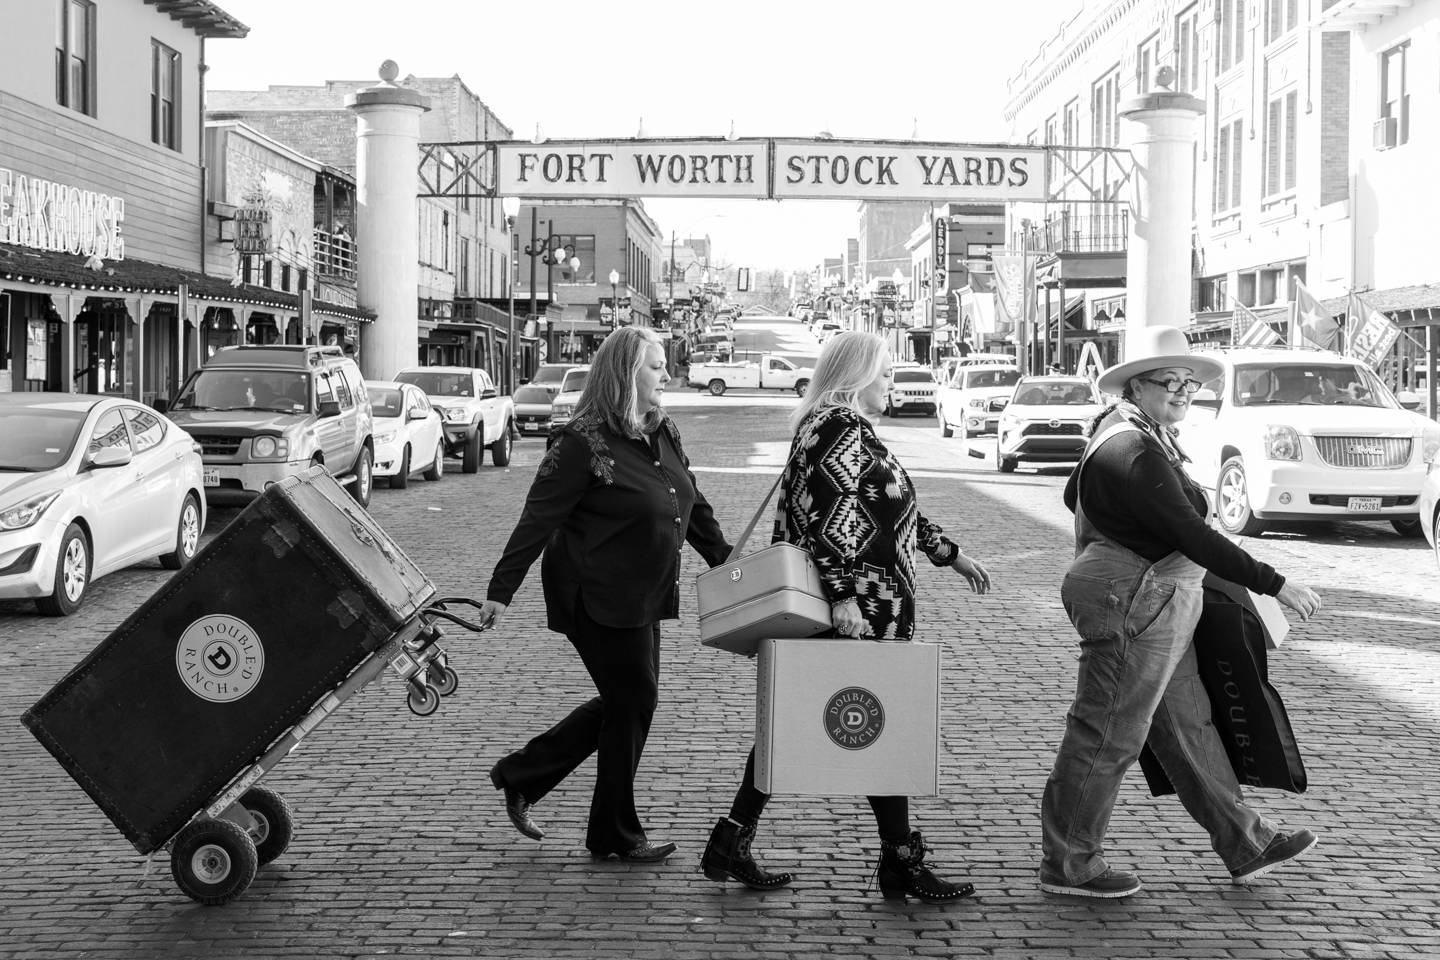 COUNTRY COUTURE TAKES ROOT IN COWTOWN